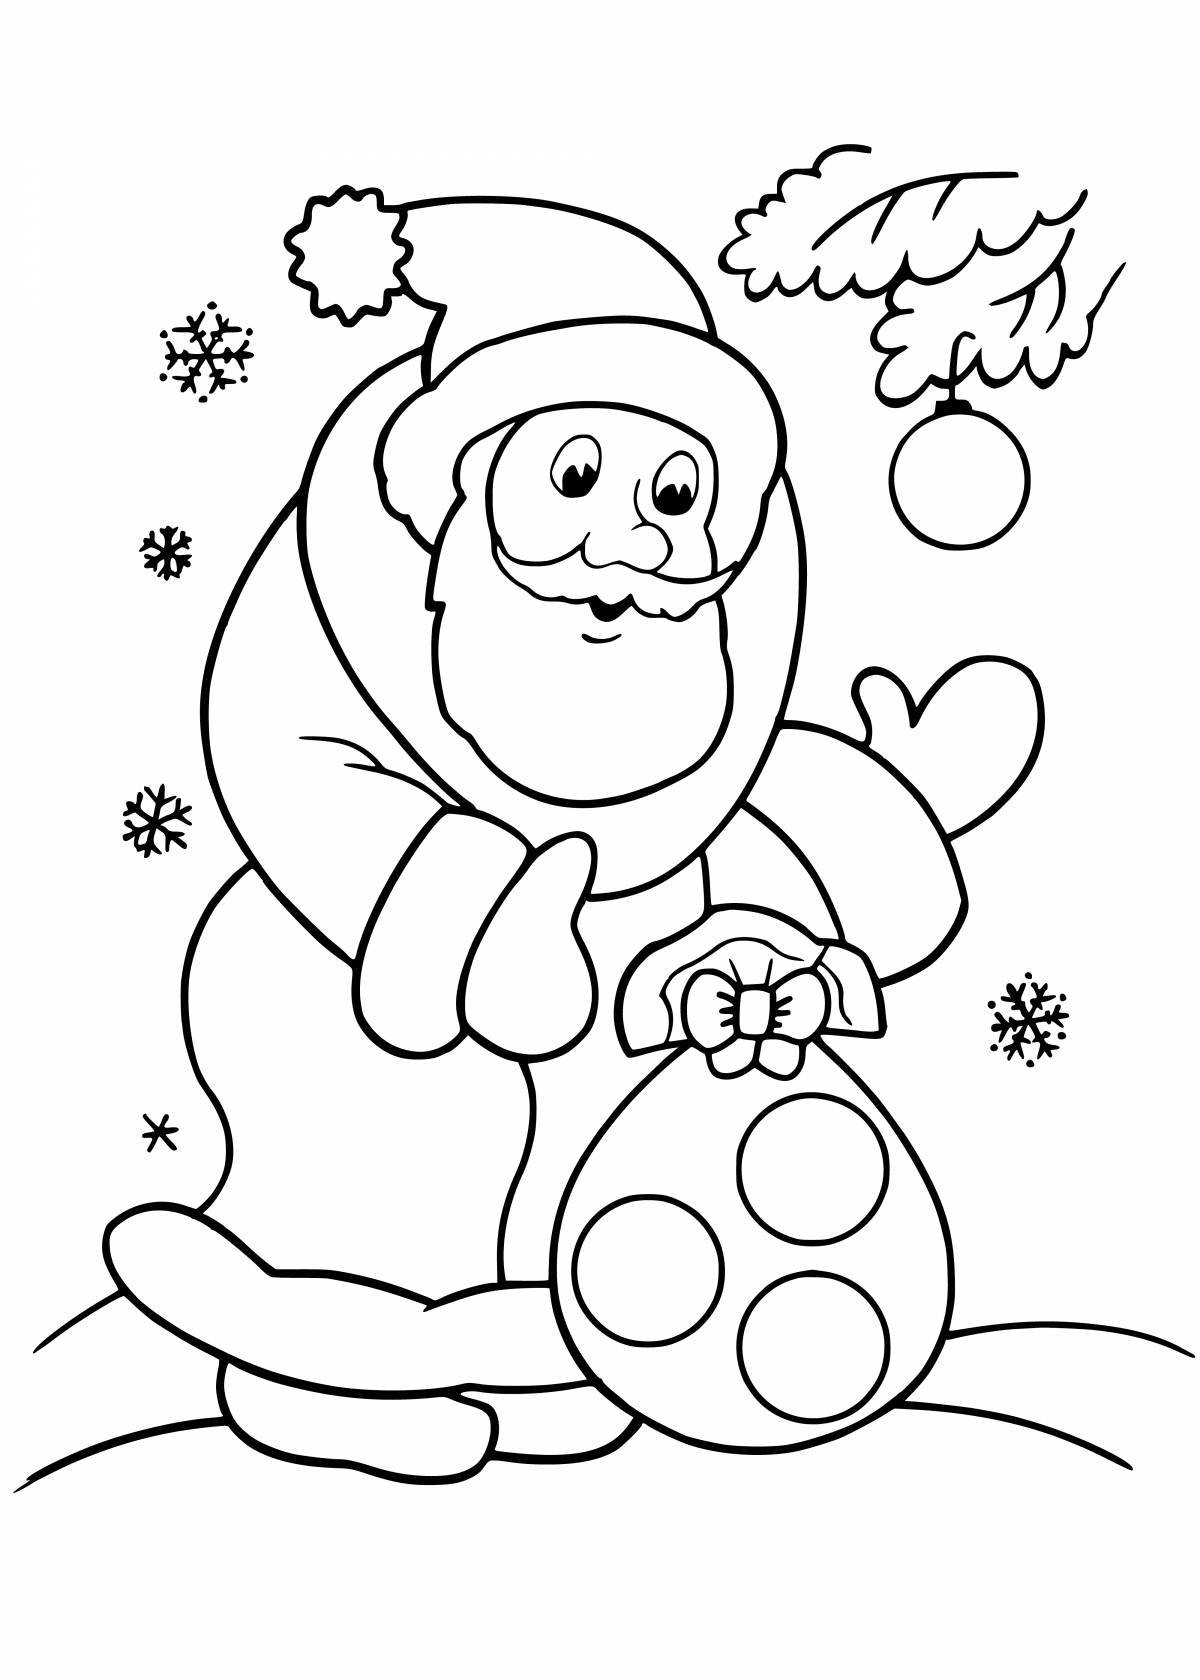 A fascinating children's Christmas coloring book